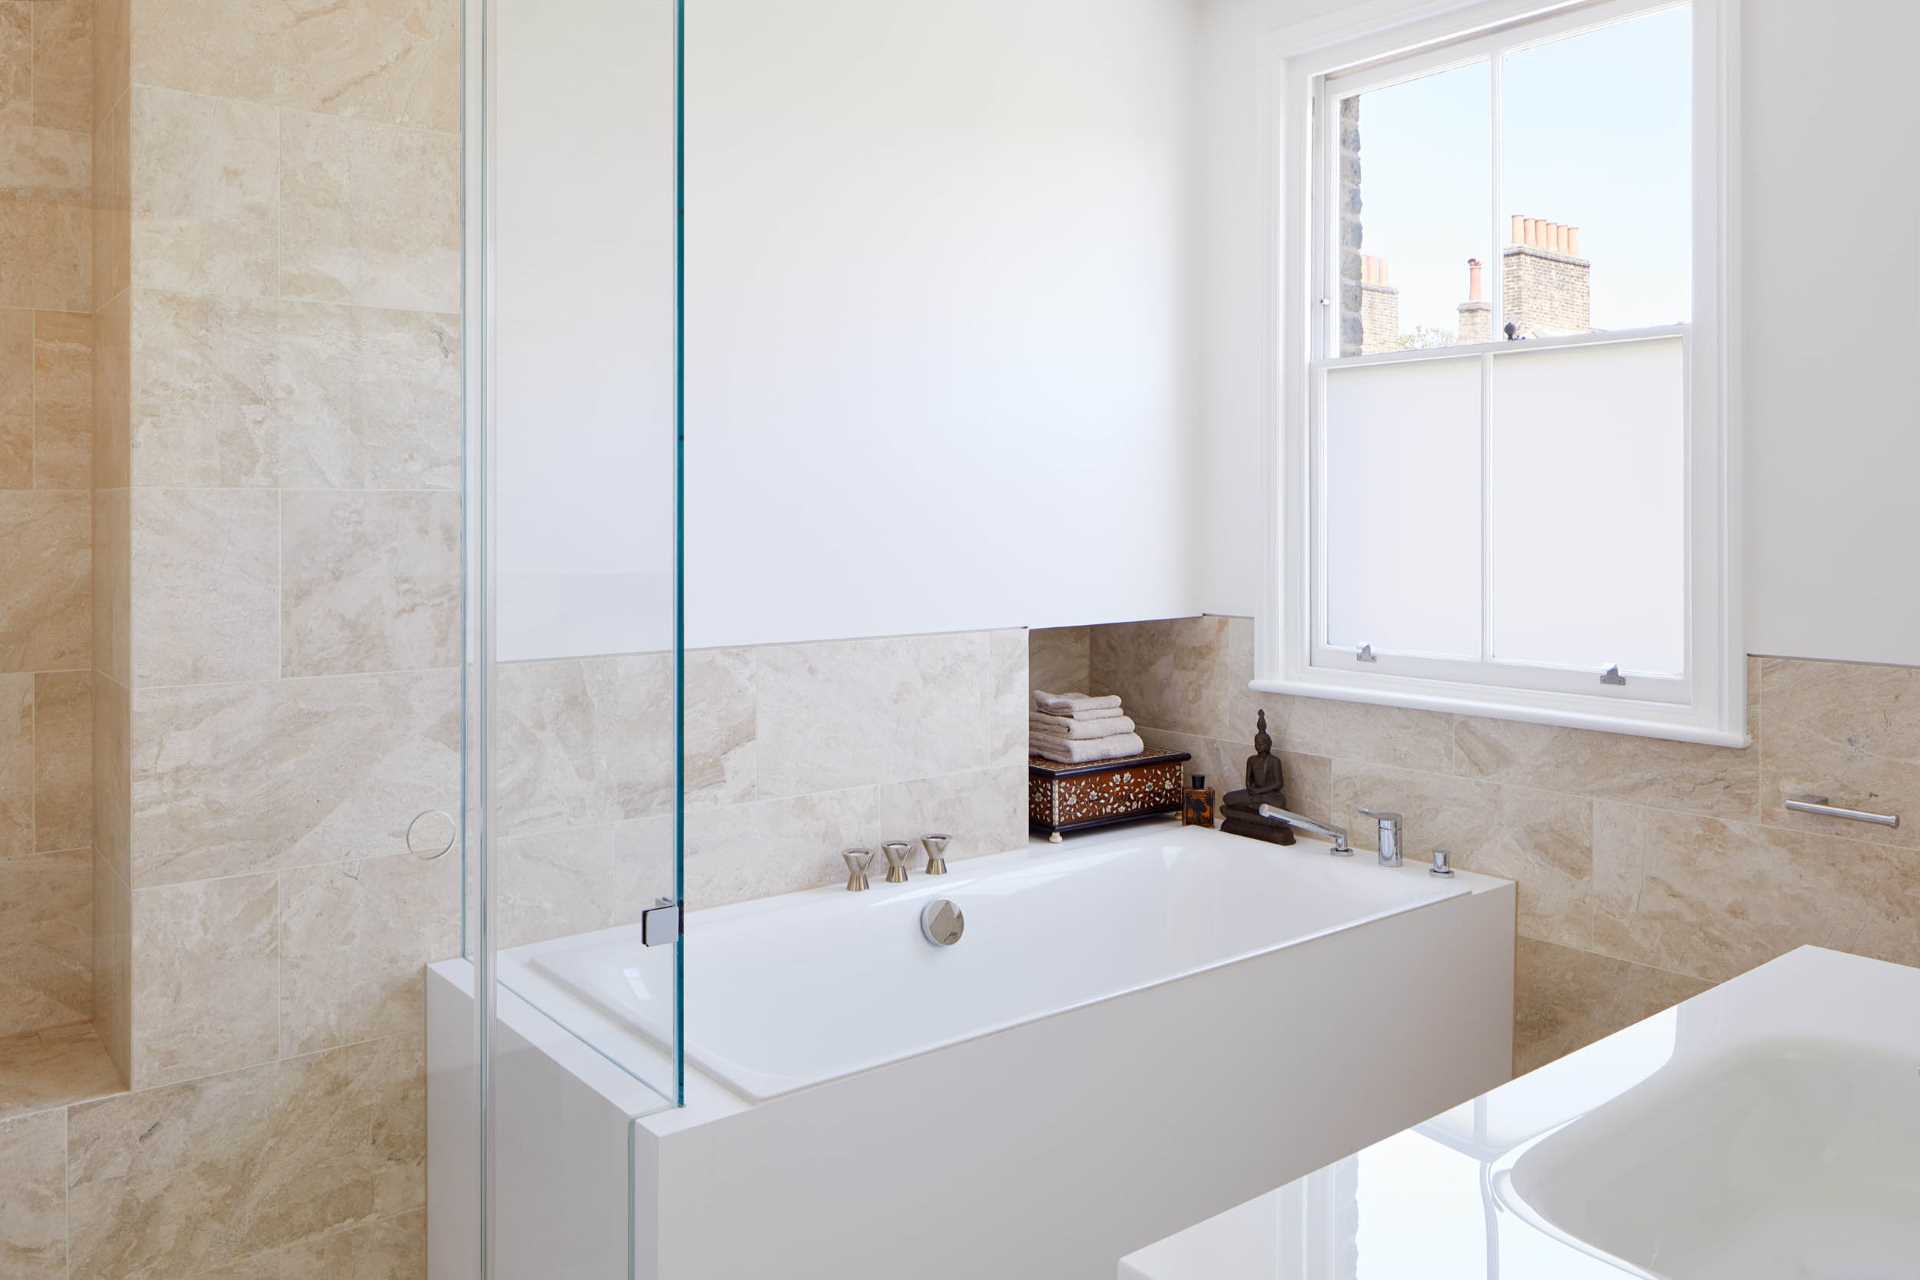 In this bathroom, light-colored tiles are paired with white walls for a contemporary look.